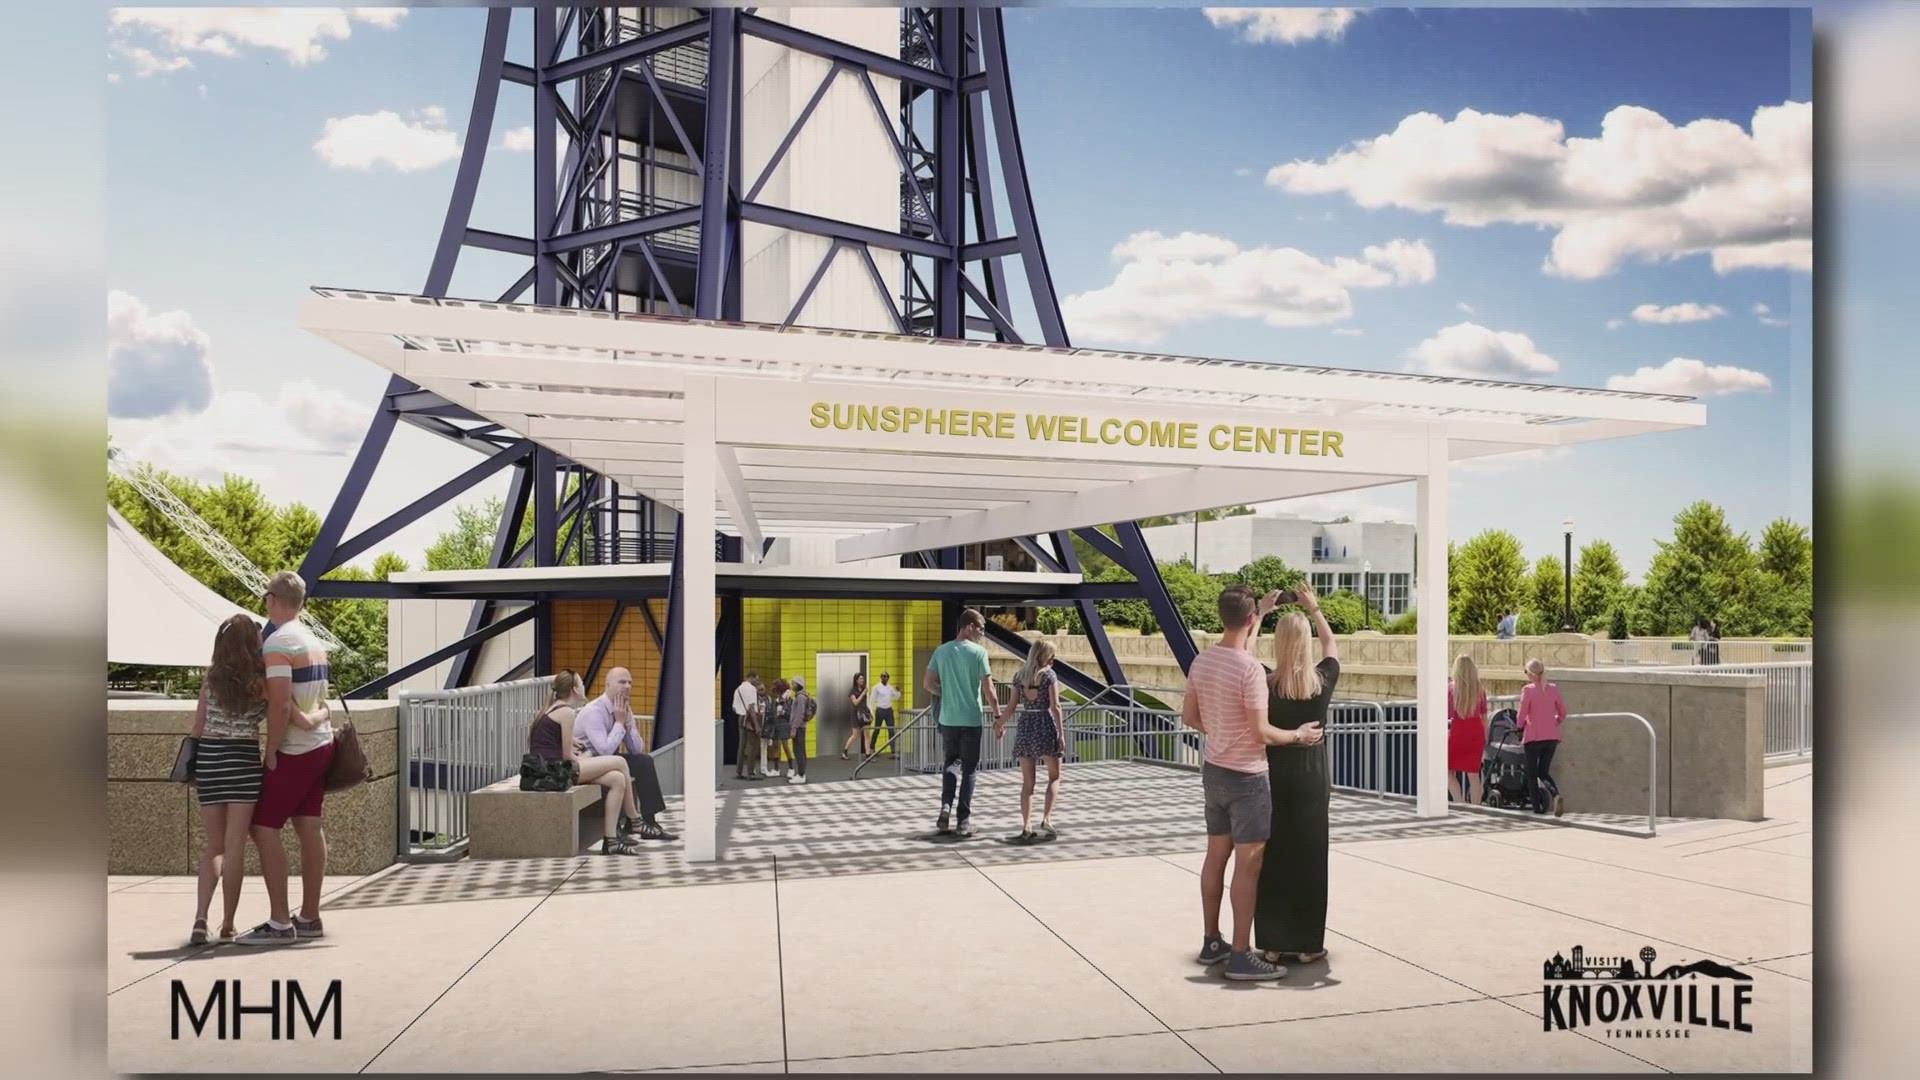 The updated welcome center will feature staffed ticketing, expanded retail, brochures and information in an enclosed space overlooking World's Fair Park.